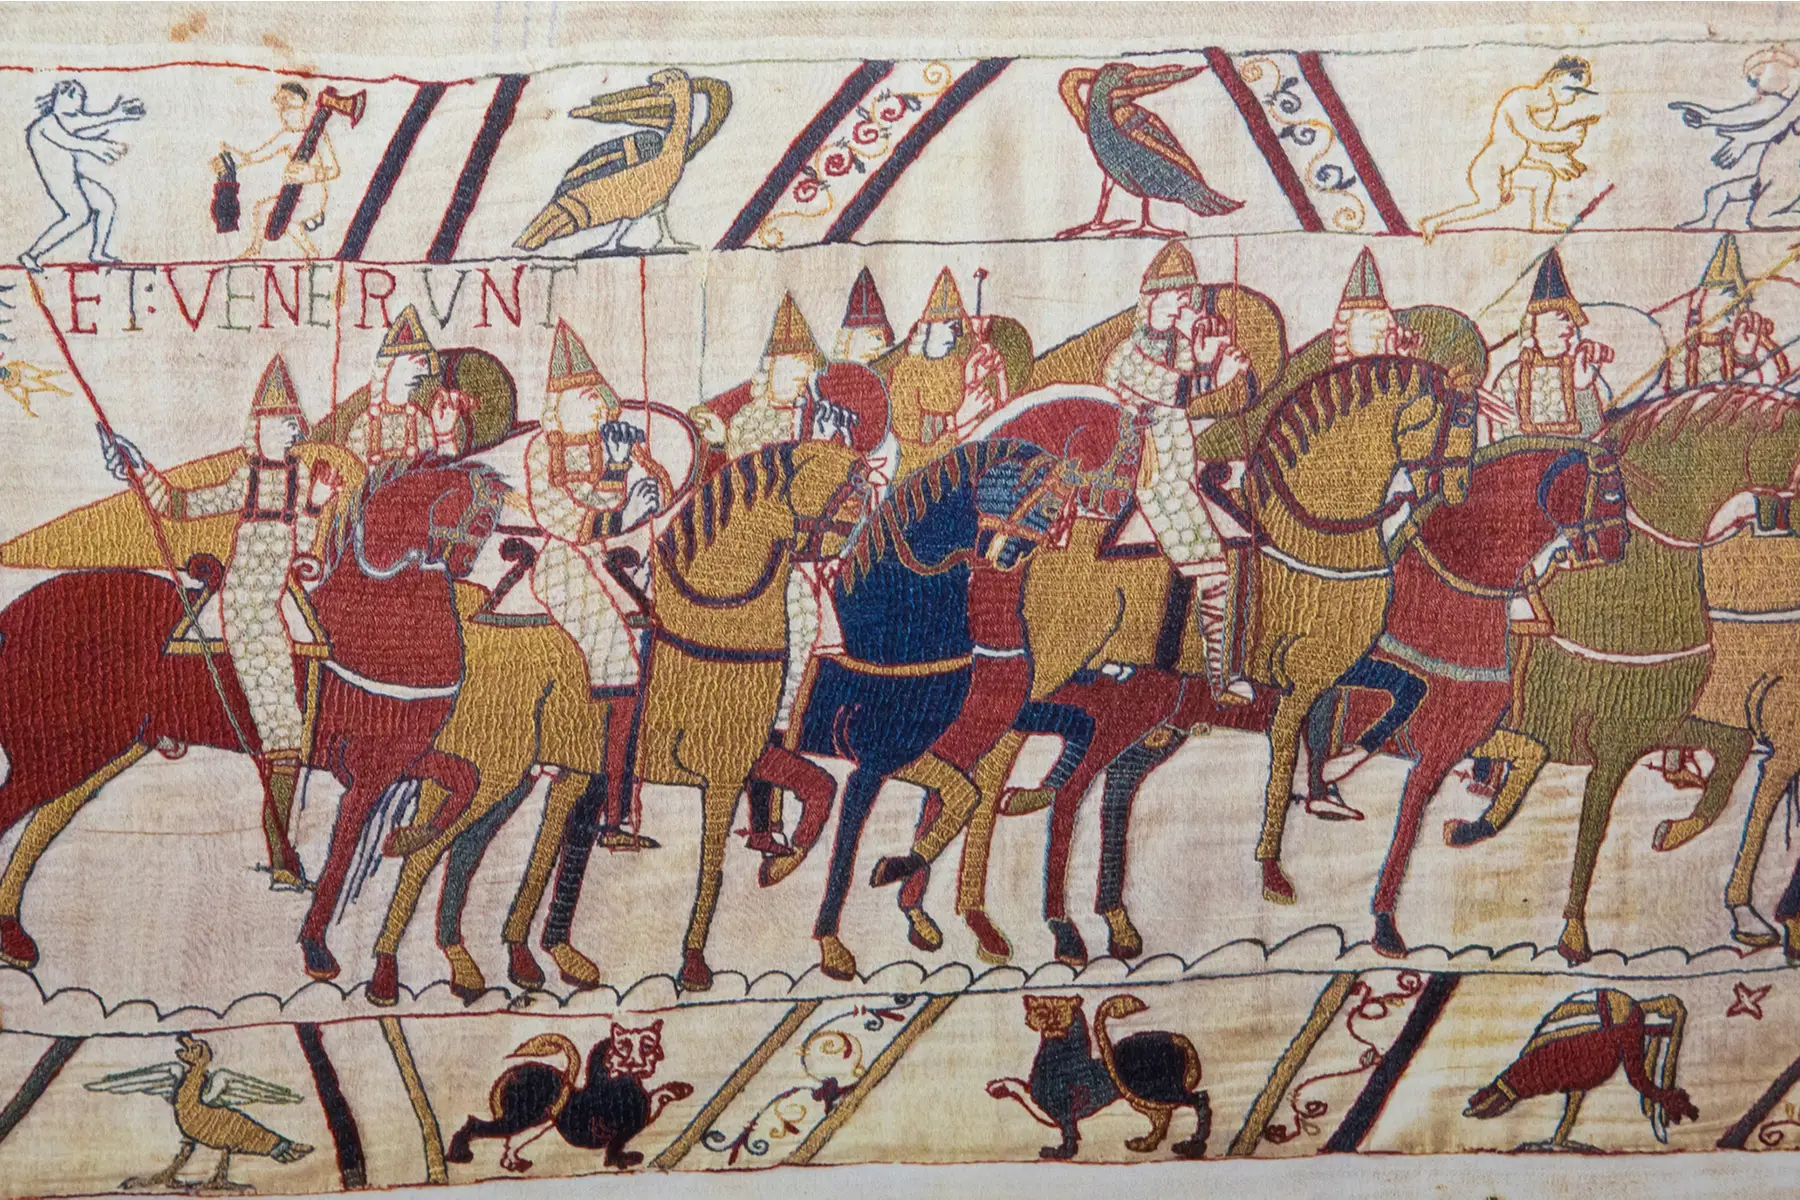 The Norman invasion of England